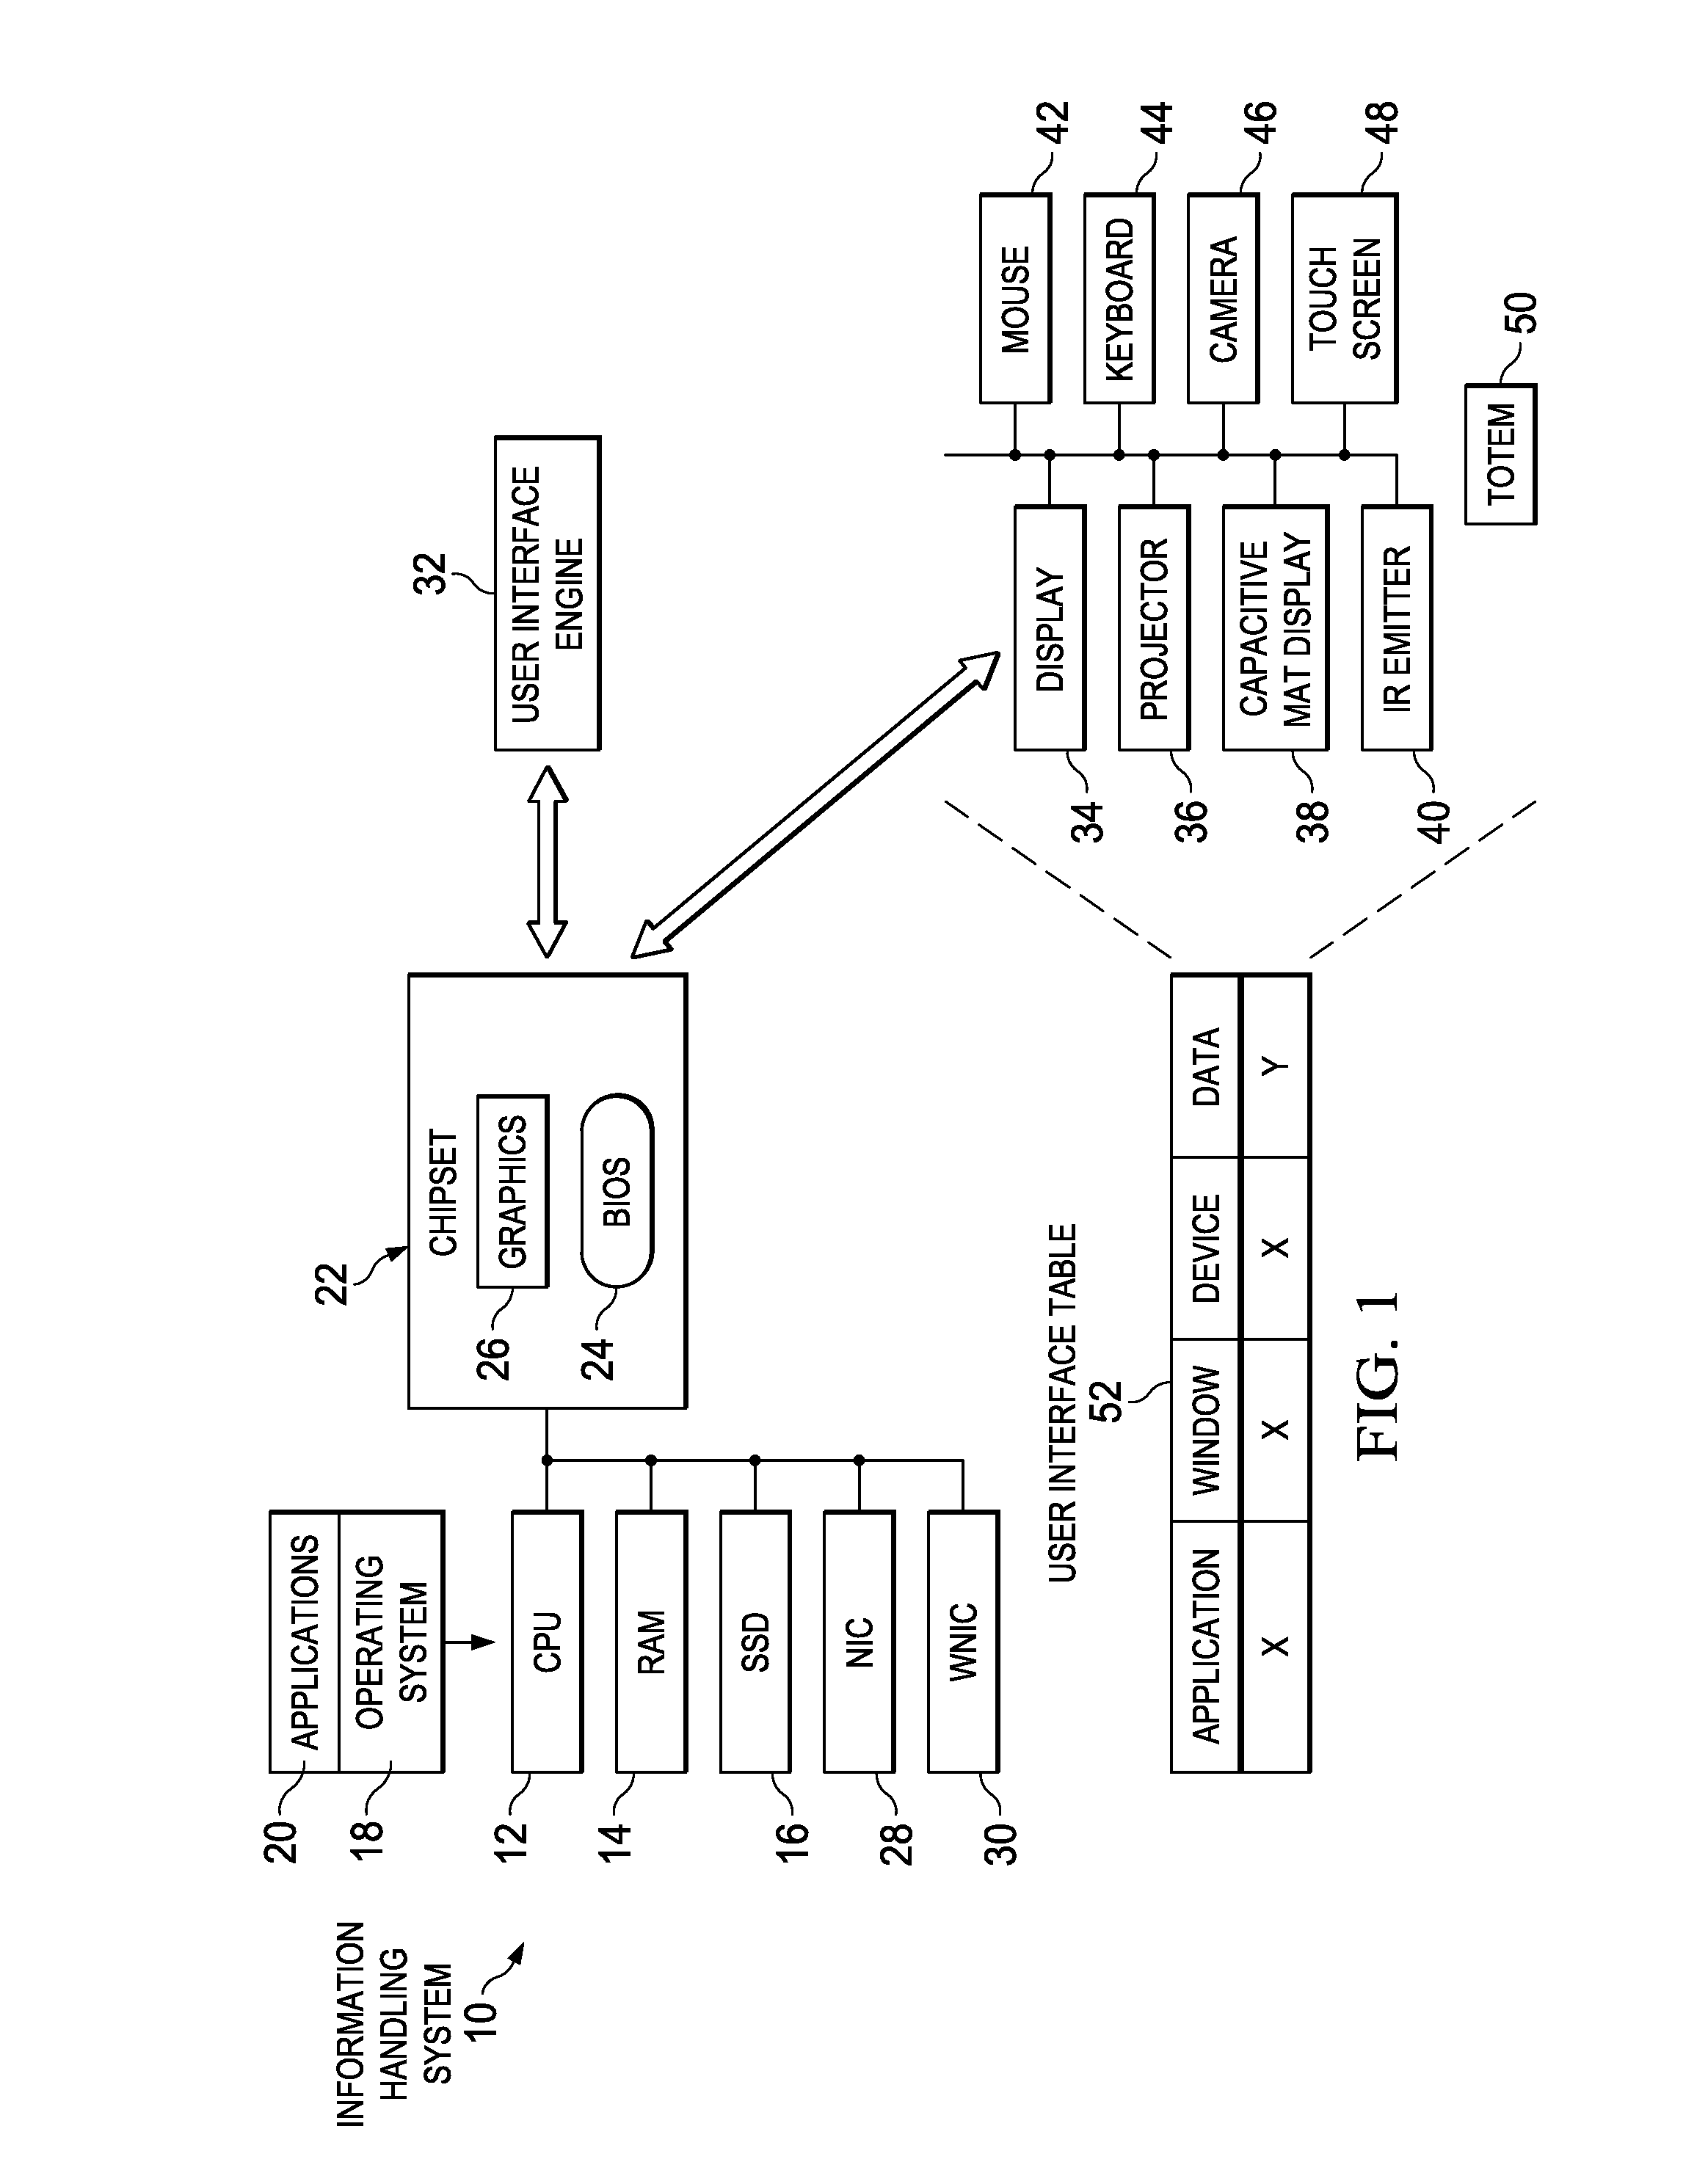 Dynamic Display Resolution Management for an Immersed Information Handling System Environment